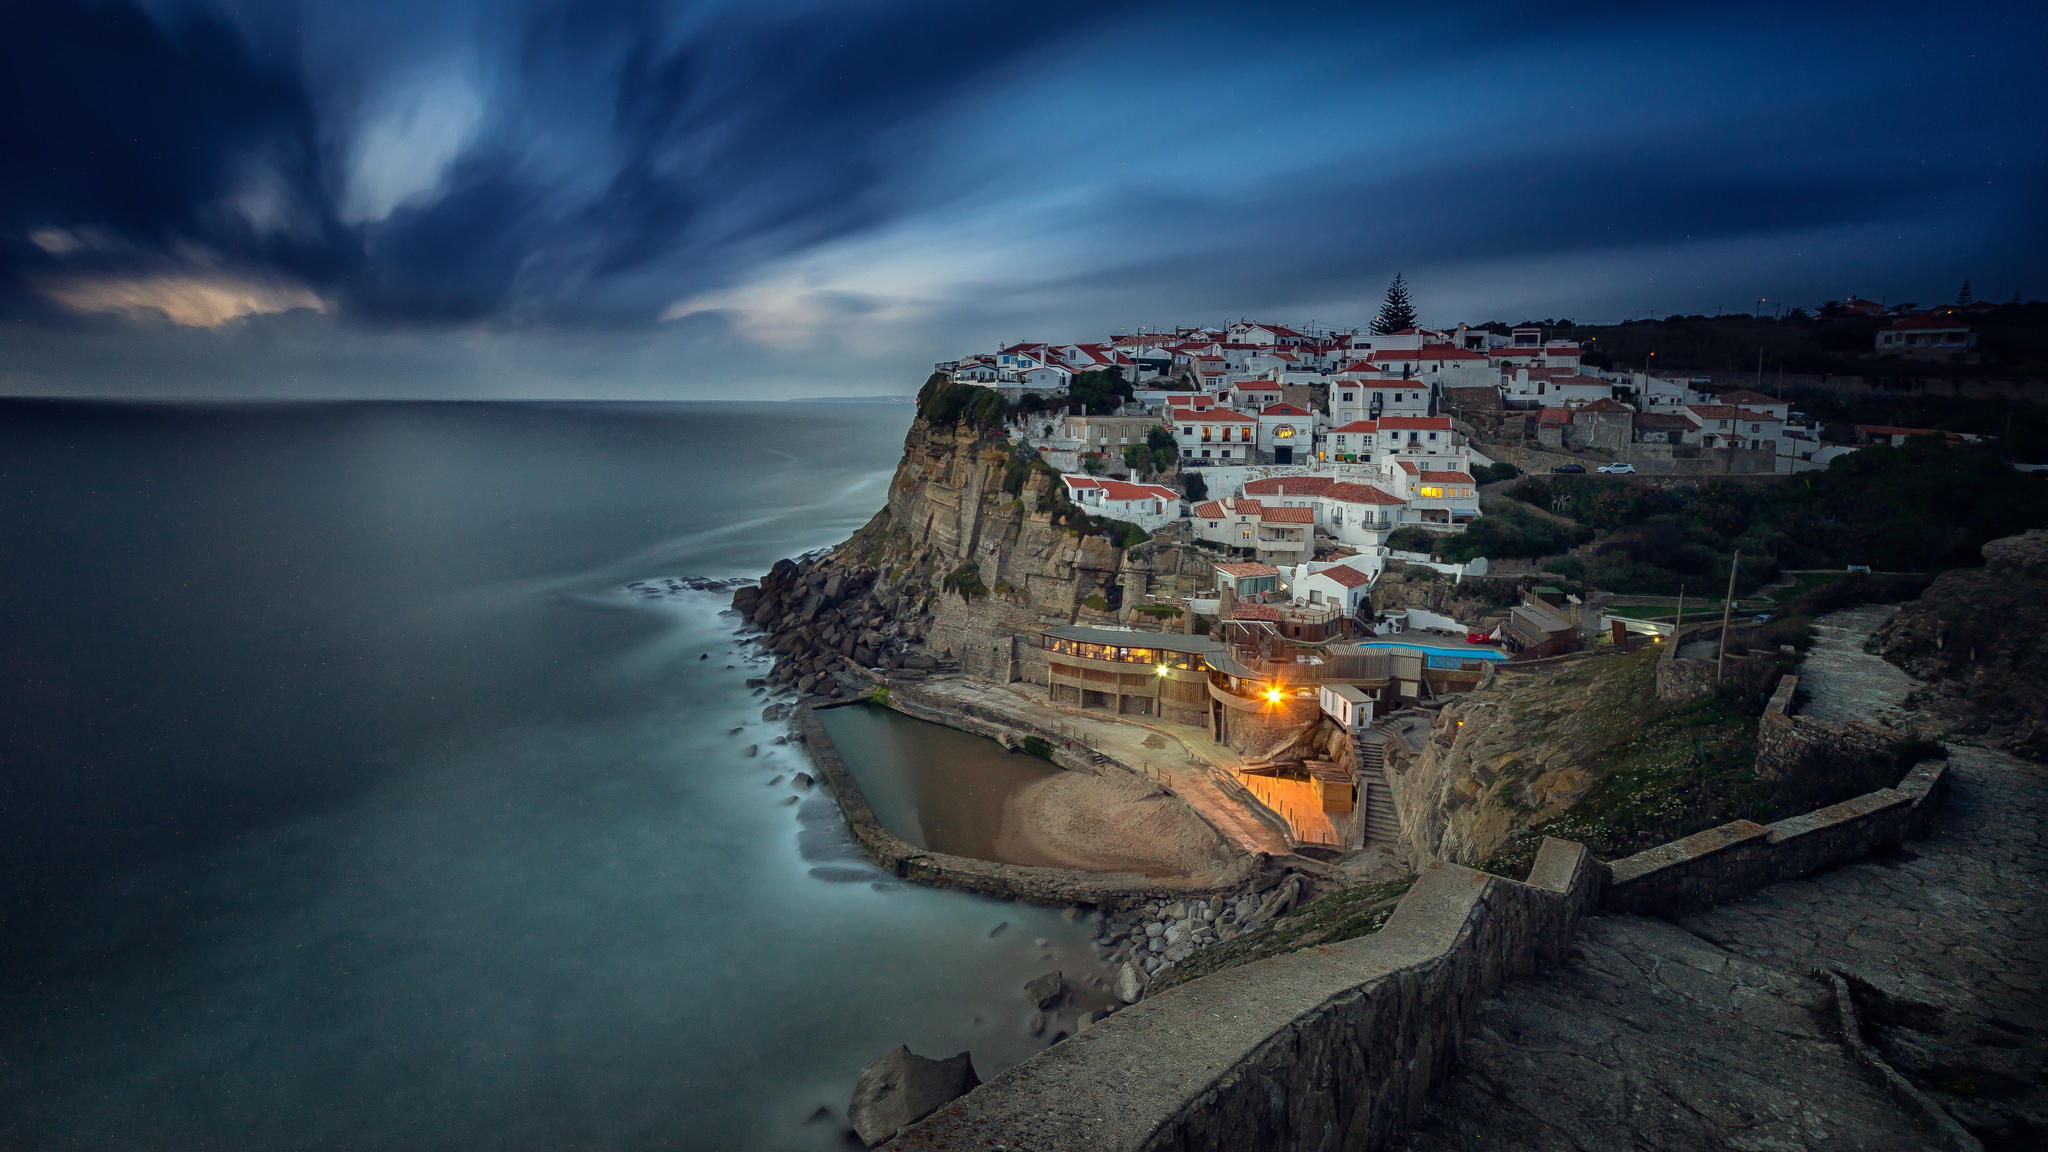 Download the screensaver of portugal, azenhas do mar to your phone for free